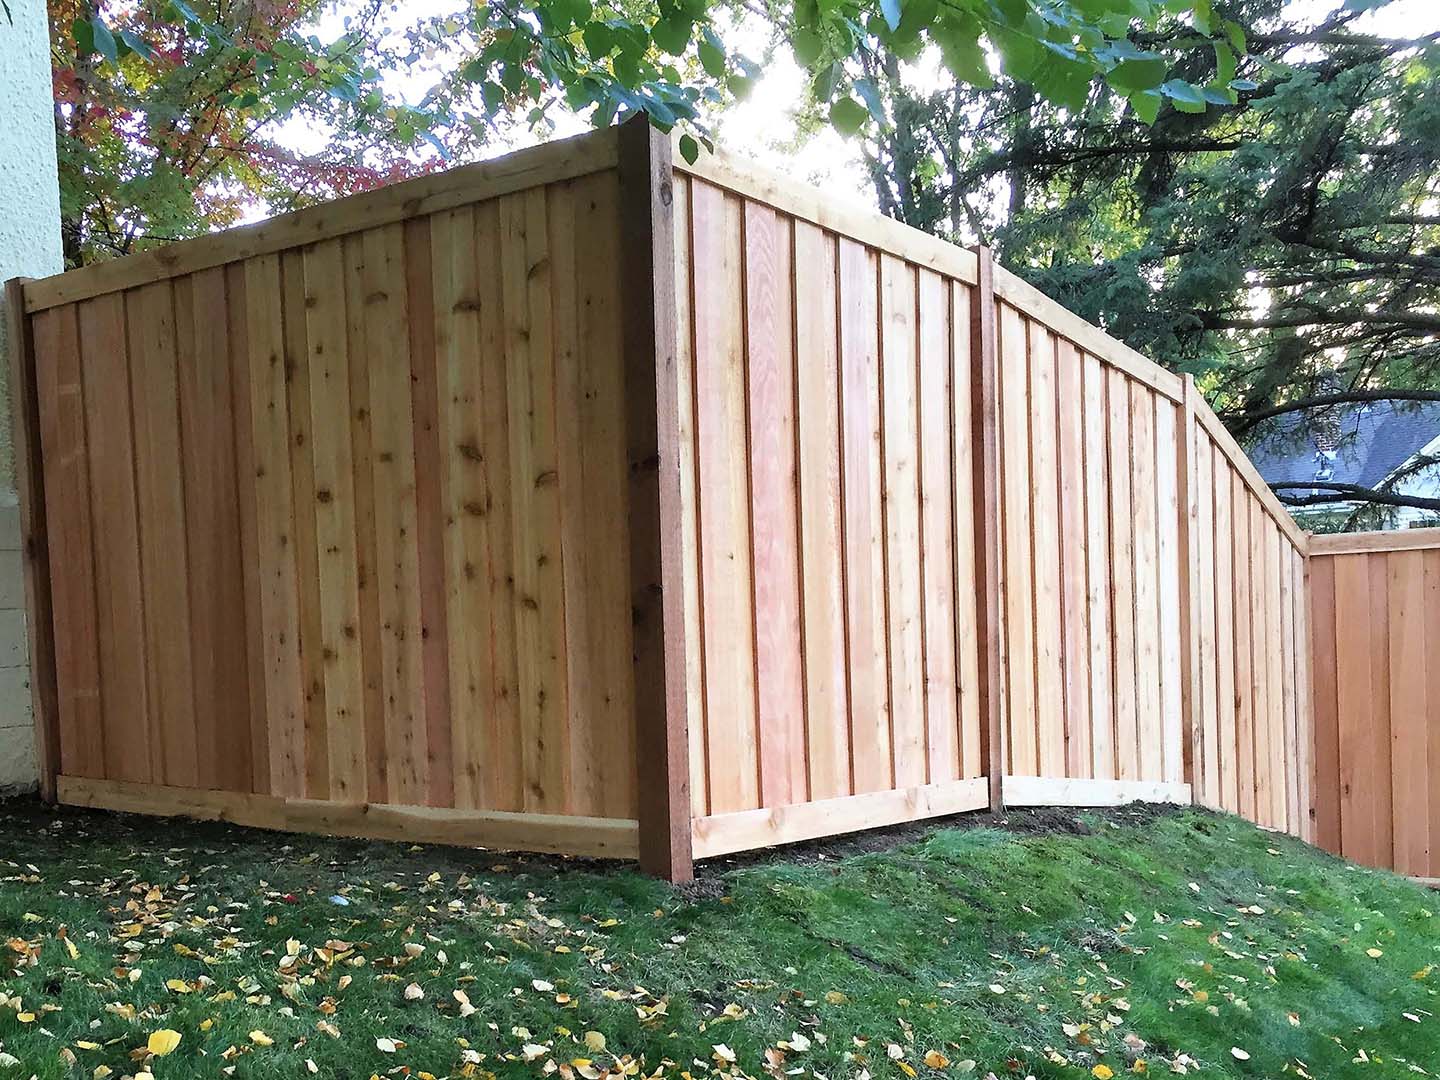 Hugo MN cap and trim style wood fence